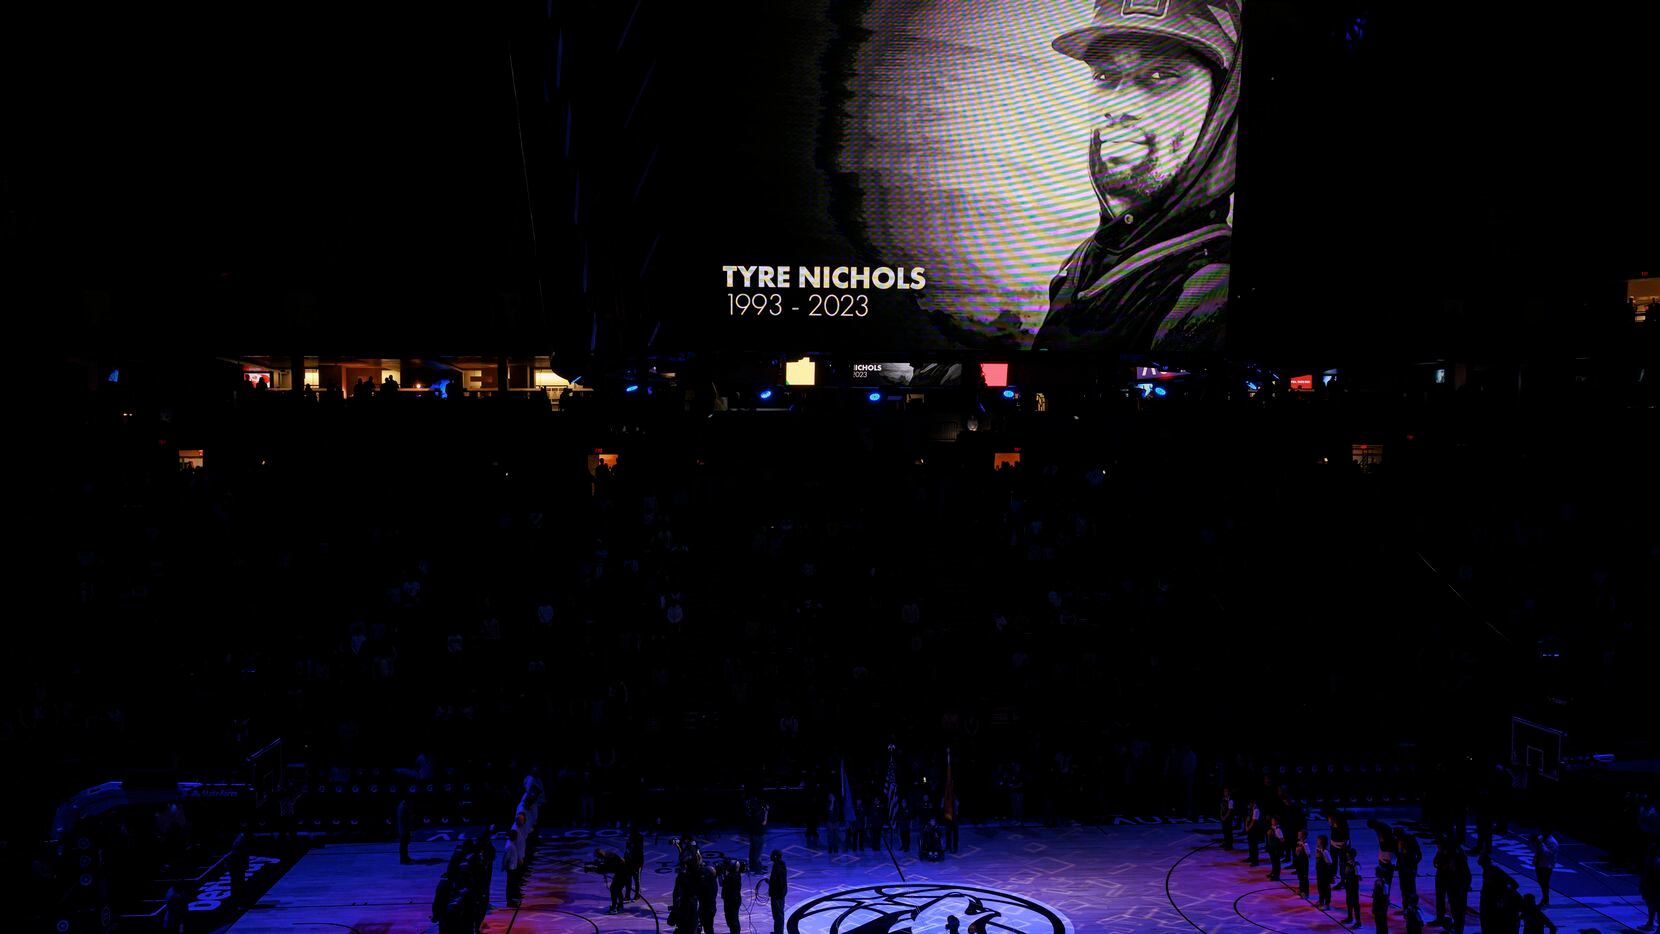 Minnesota Timberwolves and Memphis Grizzlies fans pay tribute to Tyre Nichols before start...